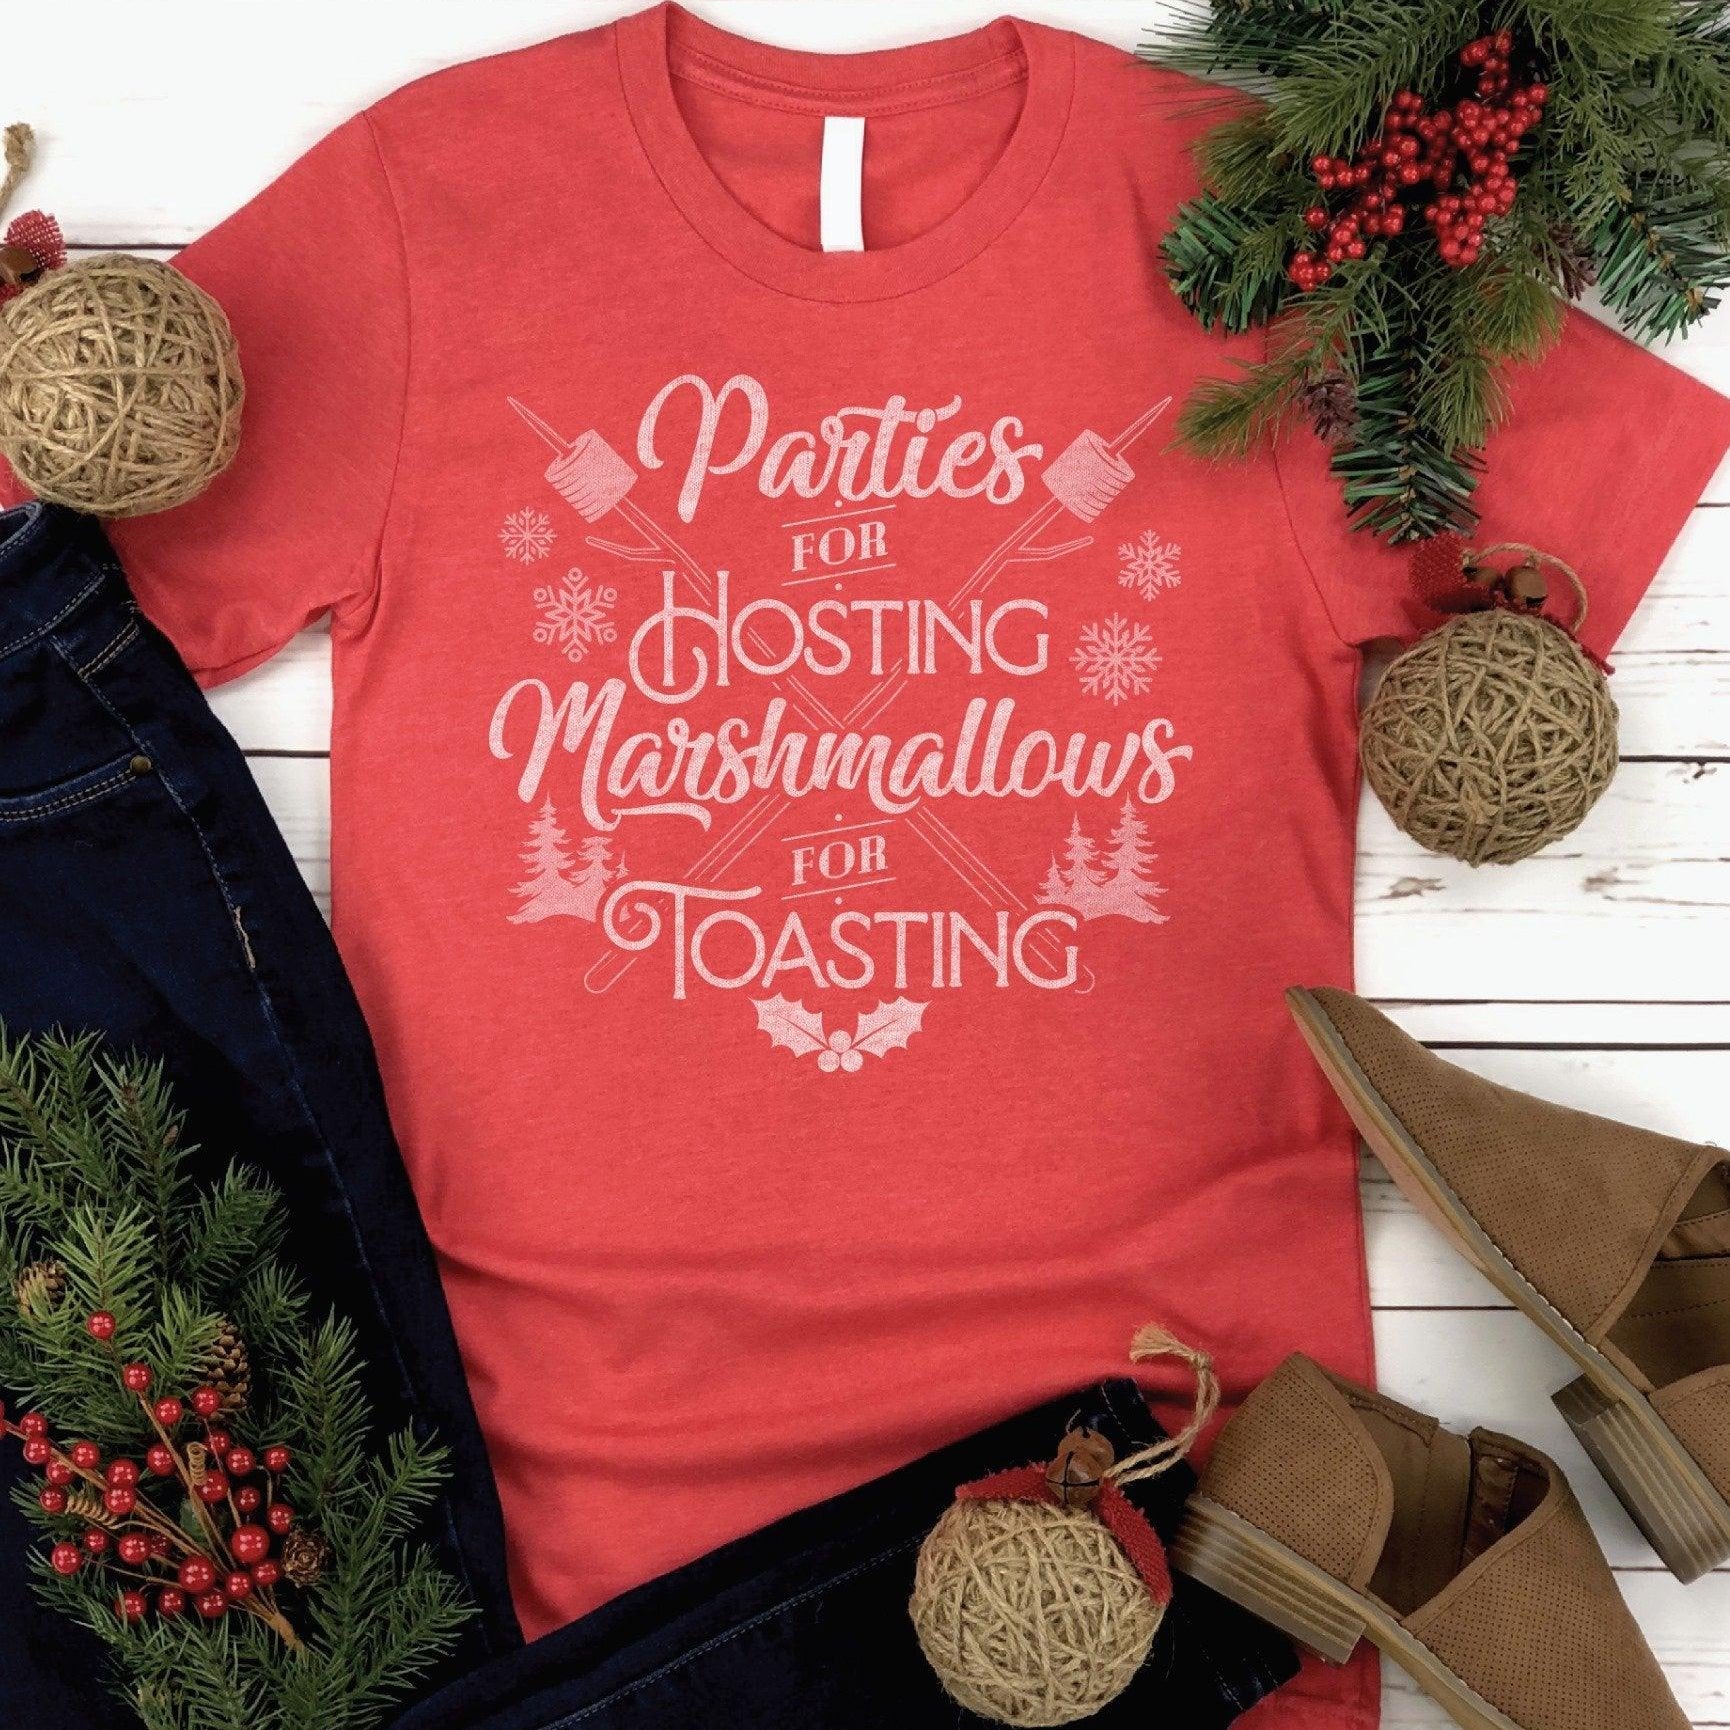 Parties for Hosting Marshmallows for Toasting 🎄🎼 - Signastyle Boutique